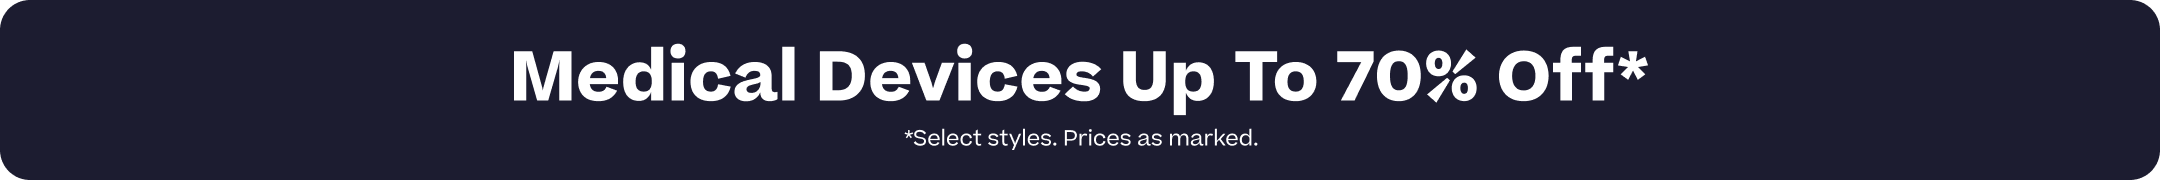 medical devices up to 70% off*. *Select styles. Prices are marked.